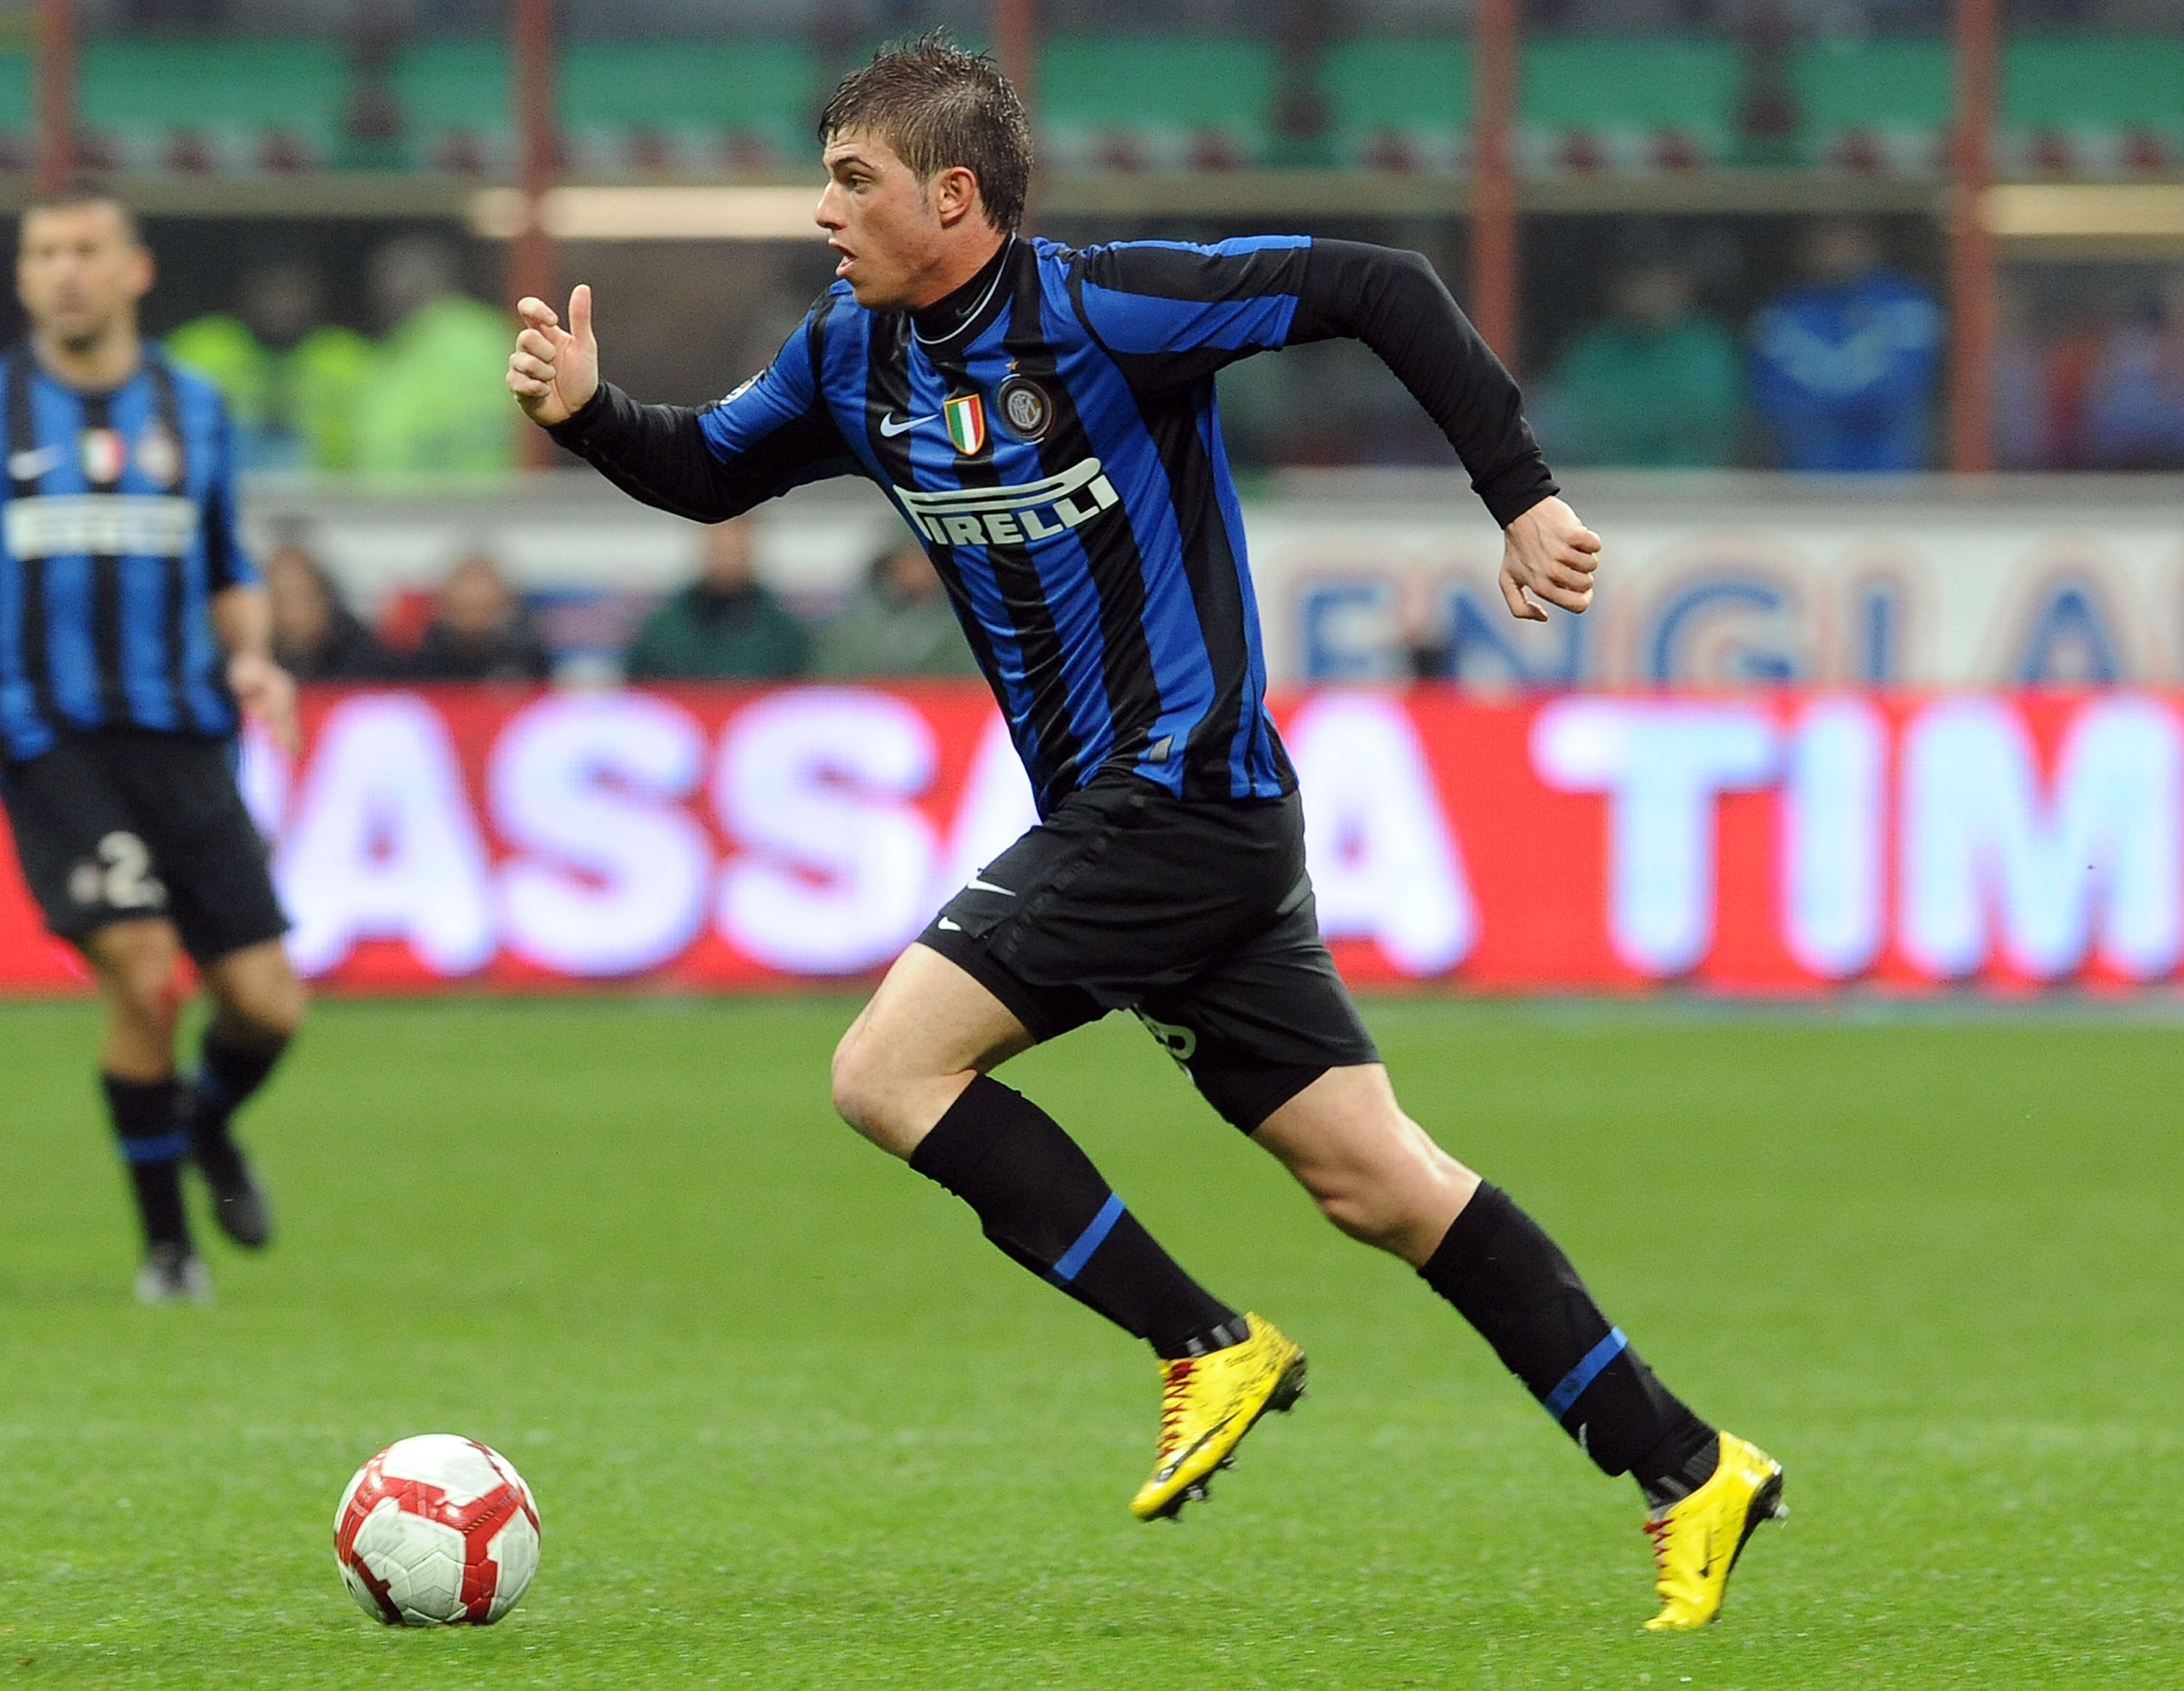 MILAN, ITALY - APRIL 03:  Davide Santon of Inter  in action during the Serie A match between FC Internazionale Milano and Bologna FC at Stadio Giuseppe Meazza on April 3, 2010 in Milan, Italy.  (Photo by Giuseppe Bellini/Getty Images)